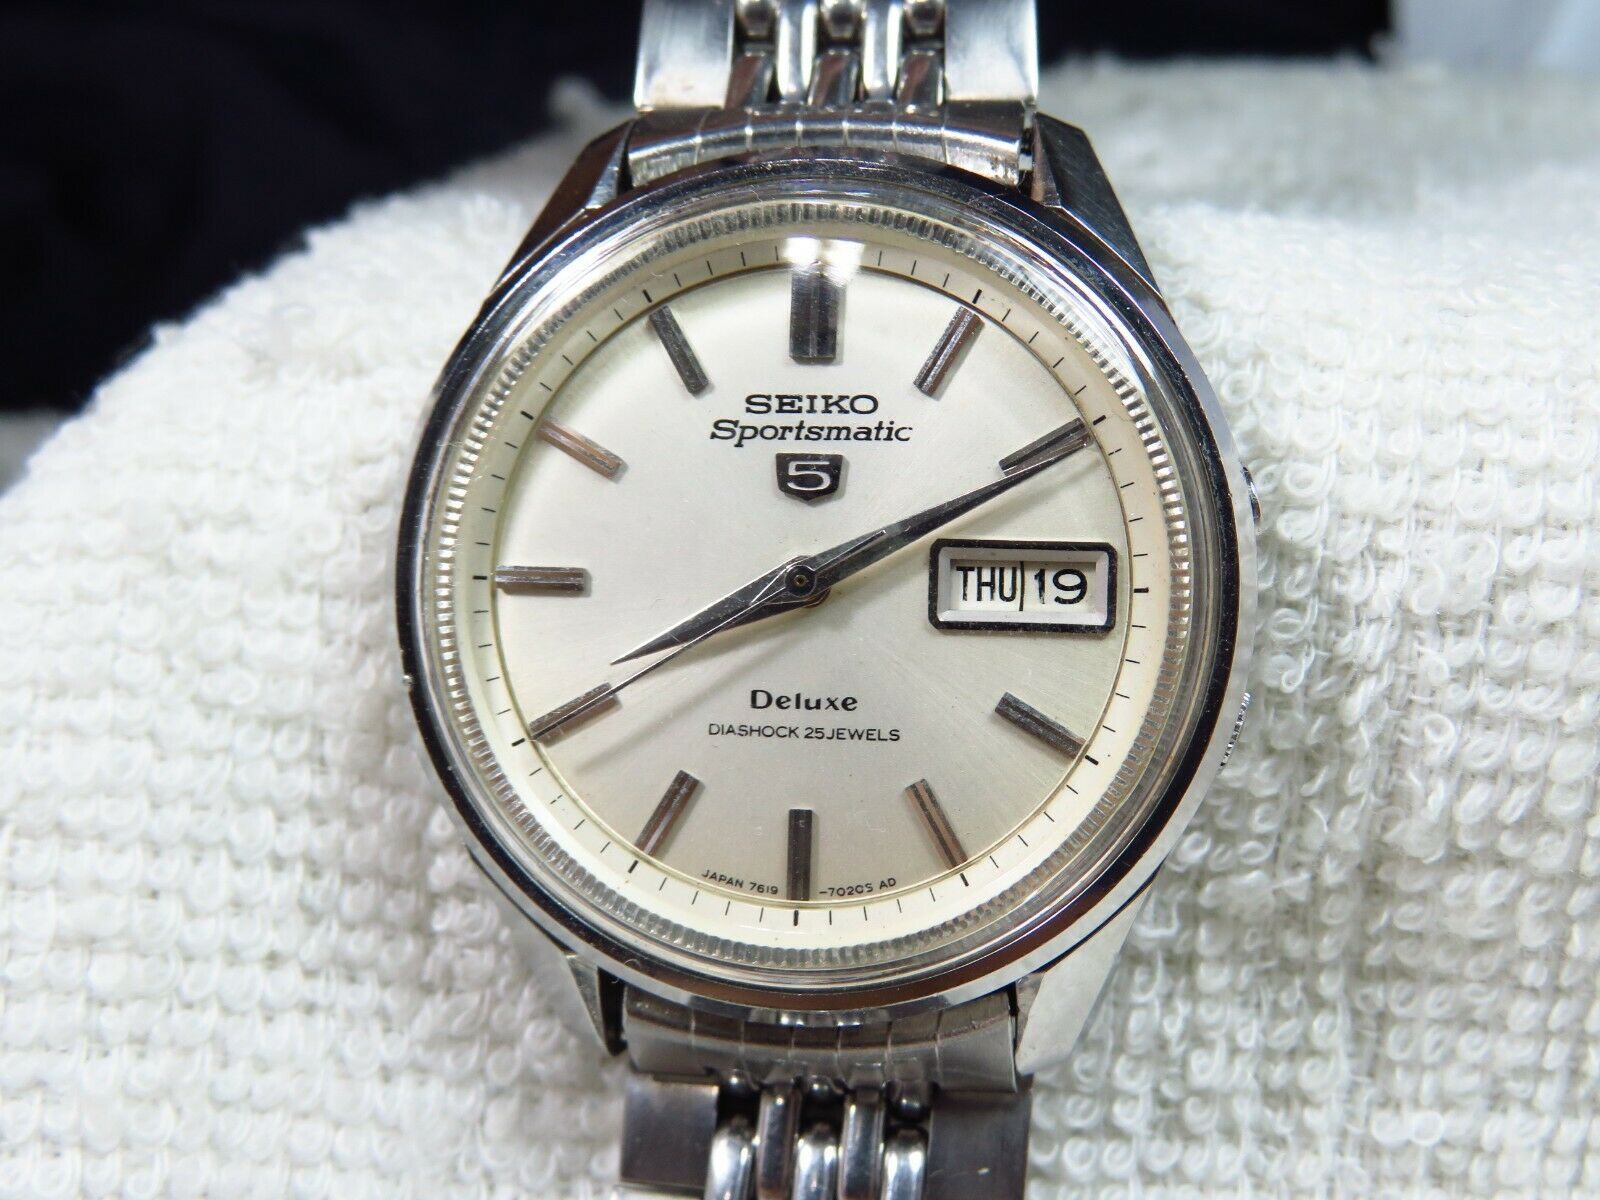 Vintage 1966 Seiko Sportsmatic 5 Deluxe watch [ 7619 - 7010 